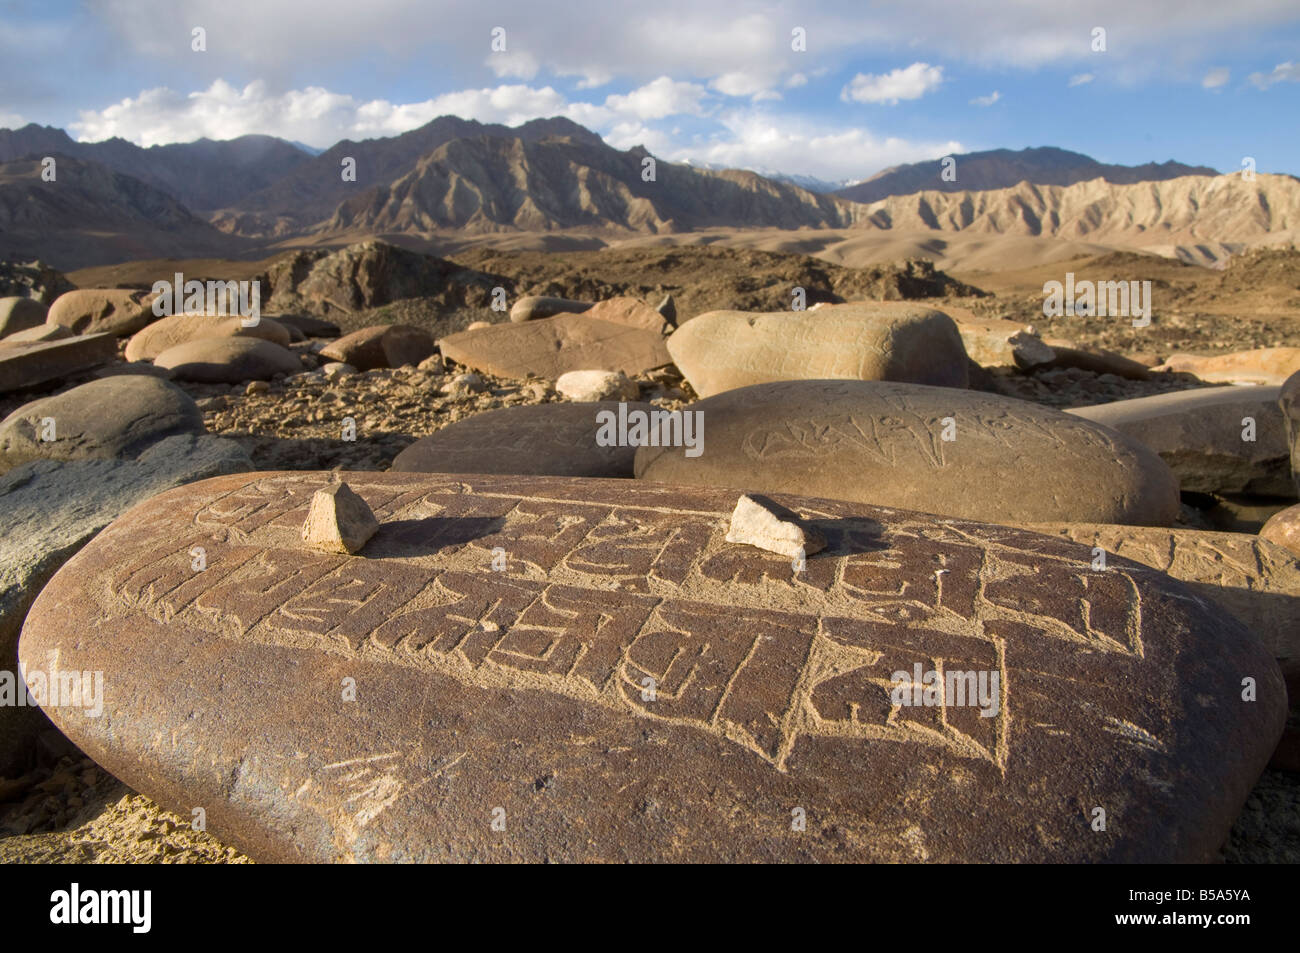 Close up of traditional carved prayer stones on a prayer wall with desert landscape and mountains beyond, Alchi, Ladakh, India Stock Photo